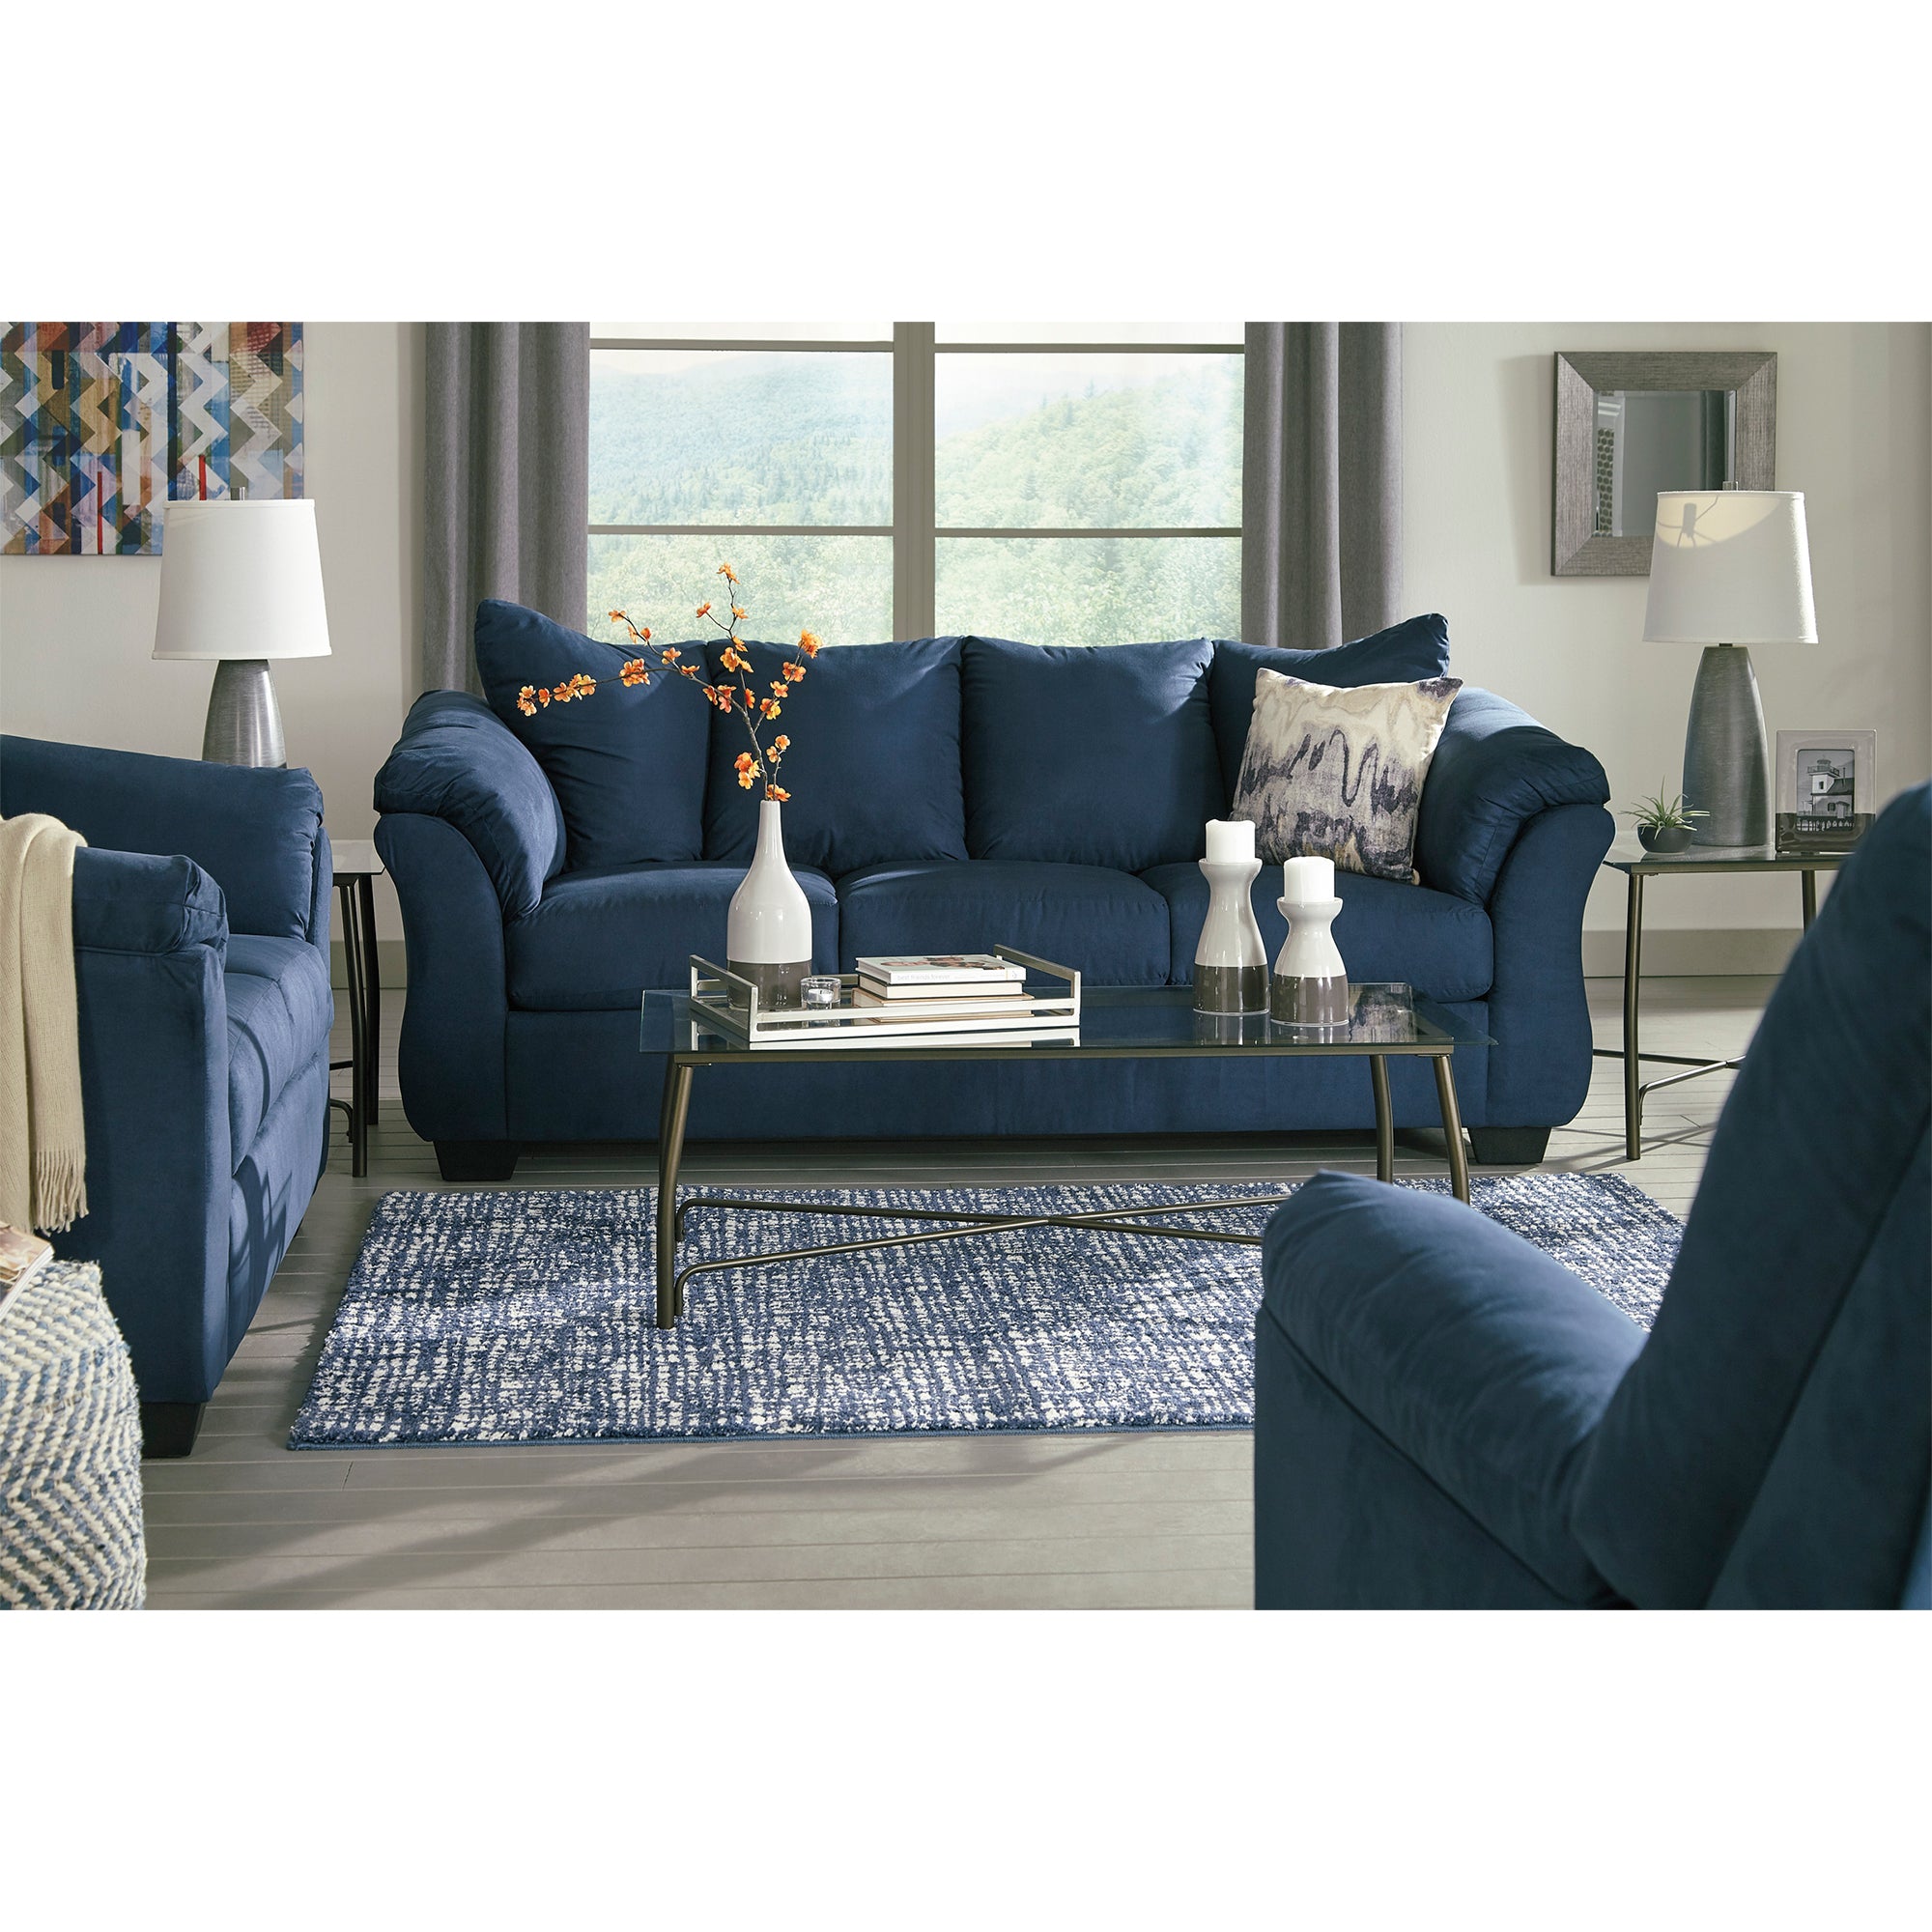 Darcy - Blue - Sofa and Loveseat